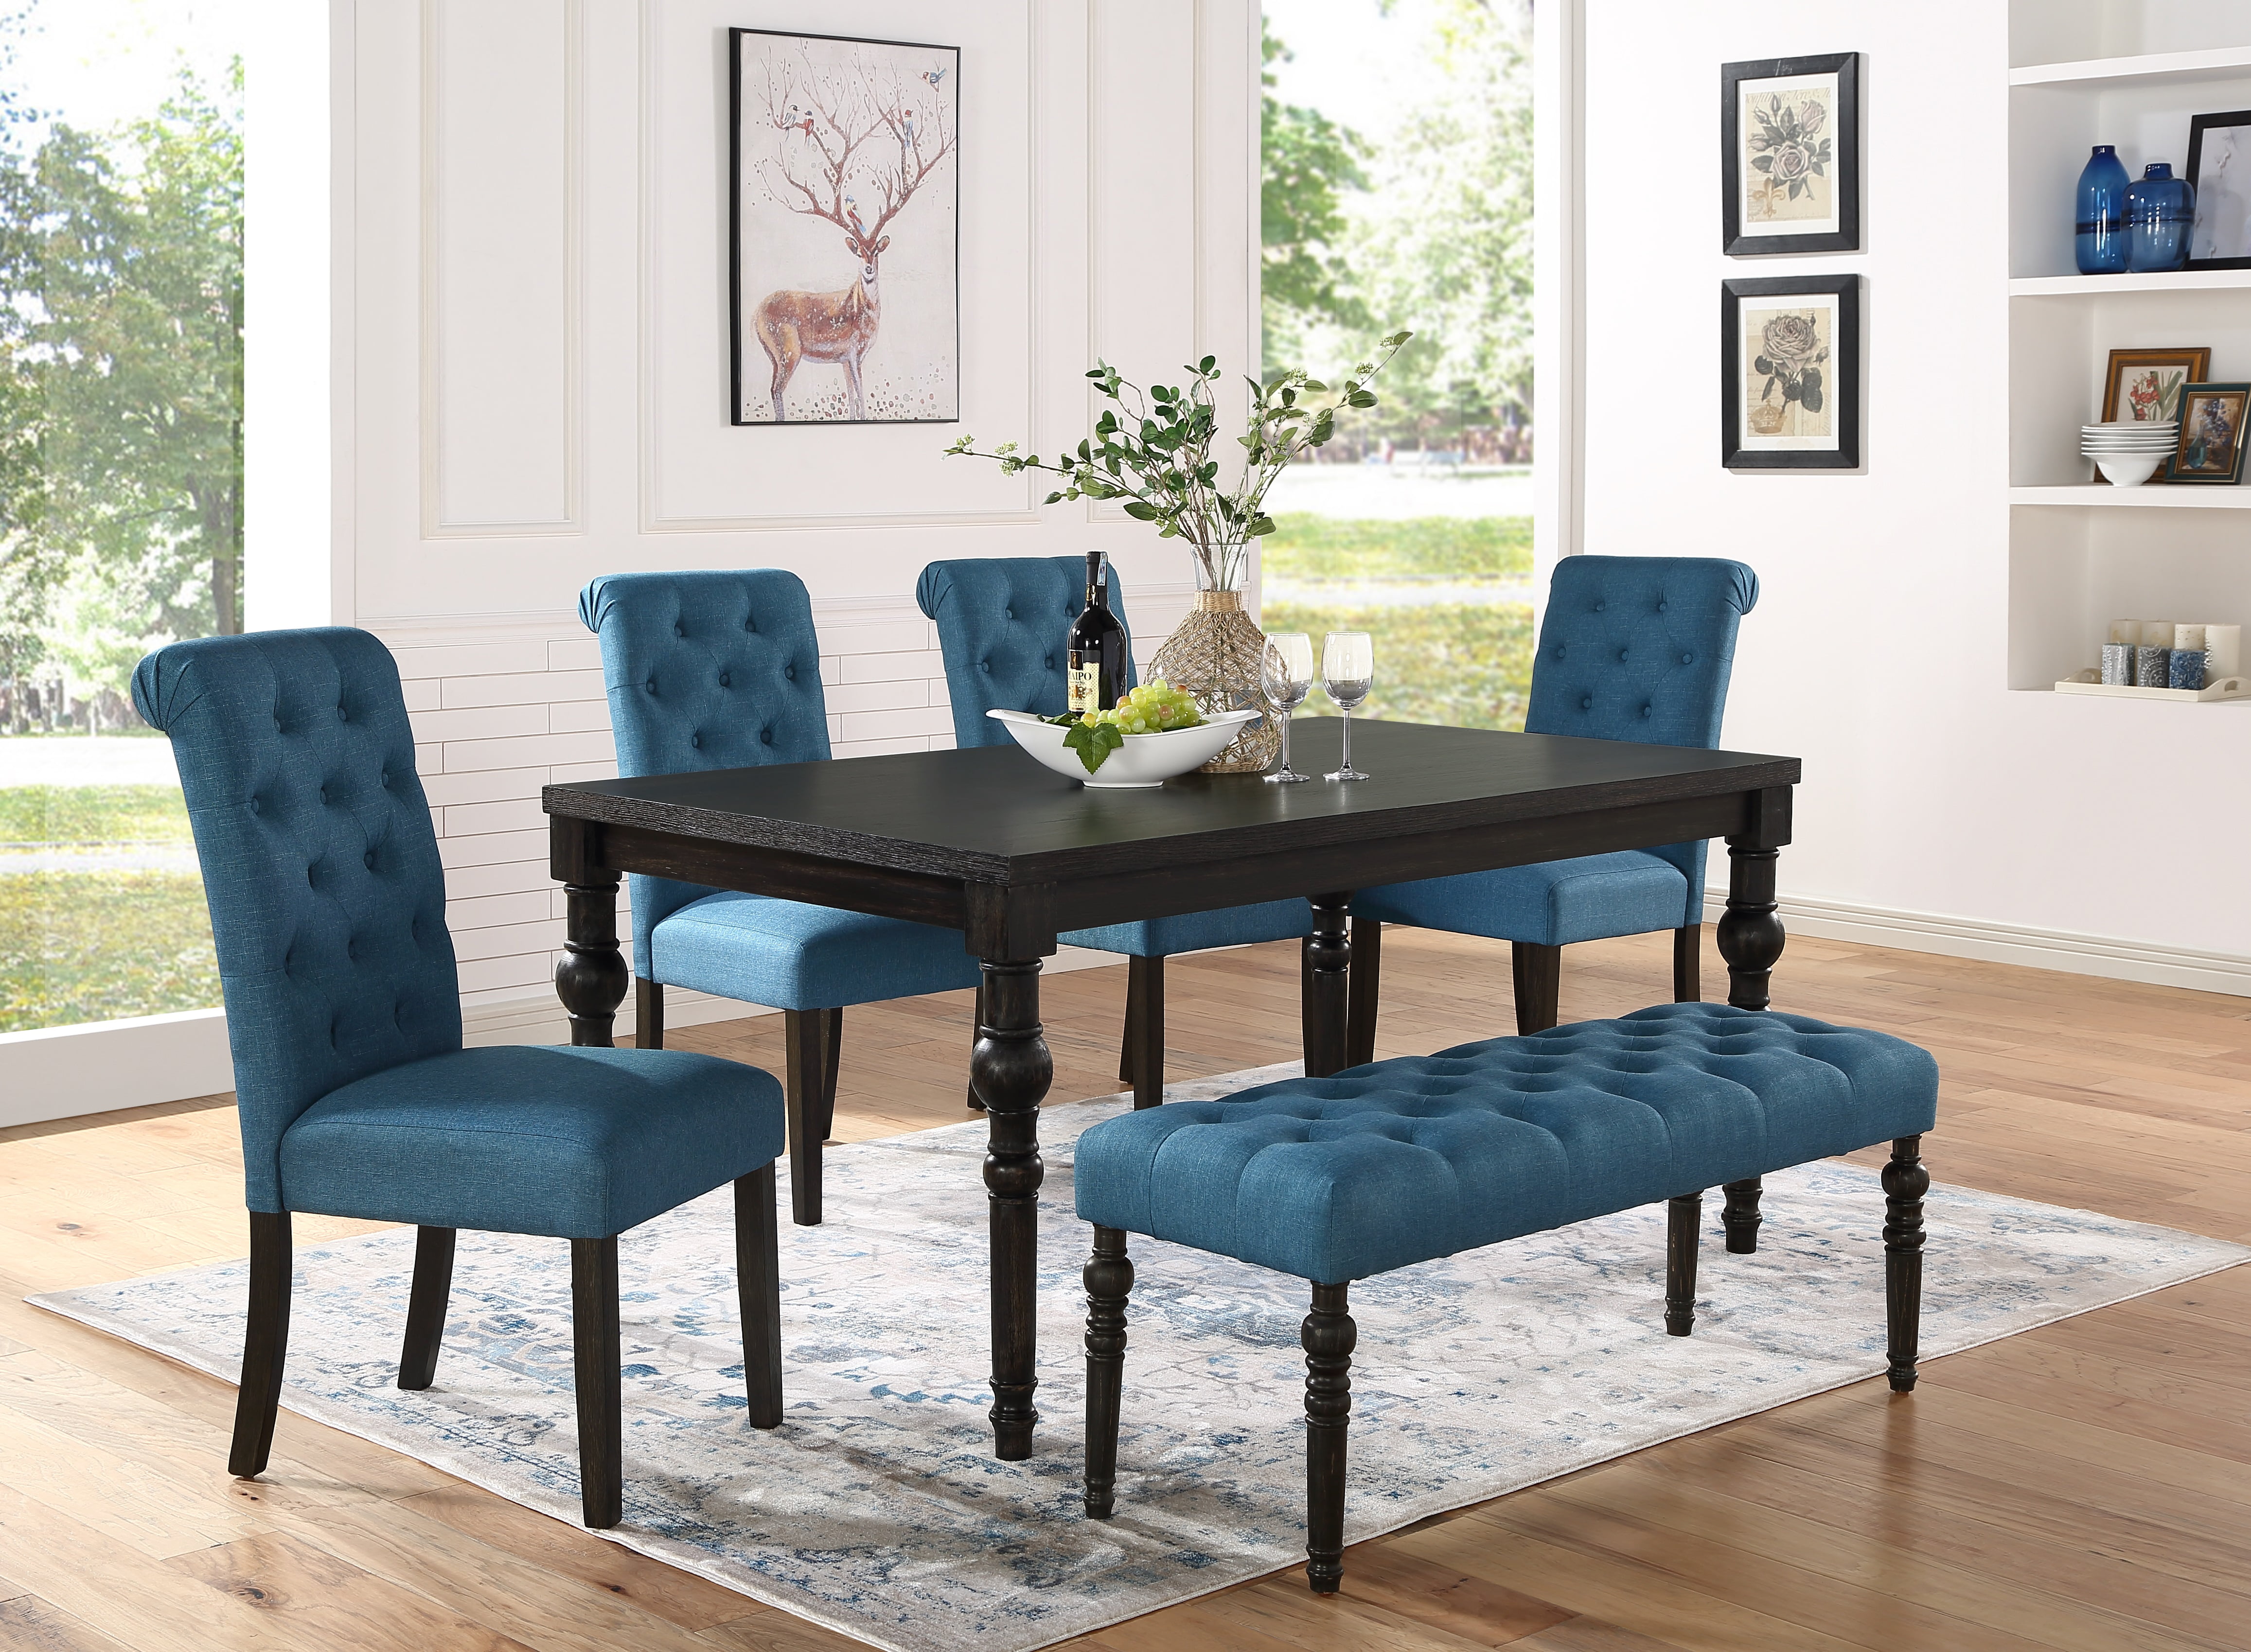 Roundhill Furniture Leviton Urban Style Dark Wash Wood Dining Set Table, 4 Chairs and Bench